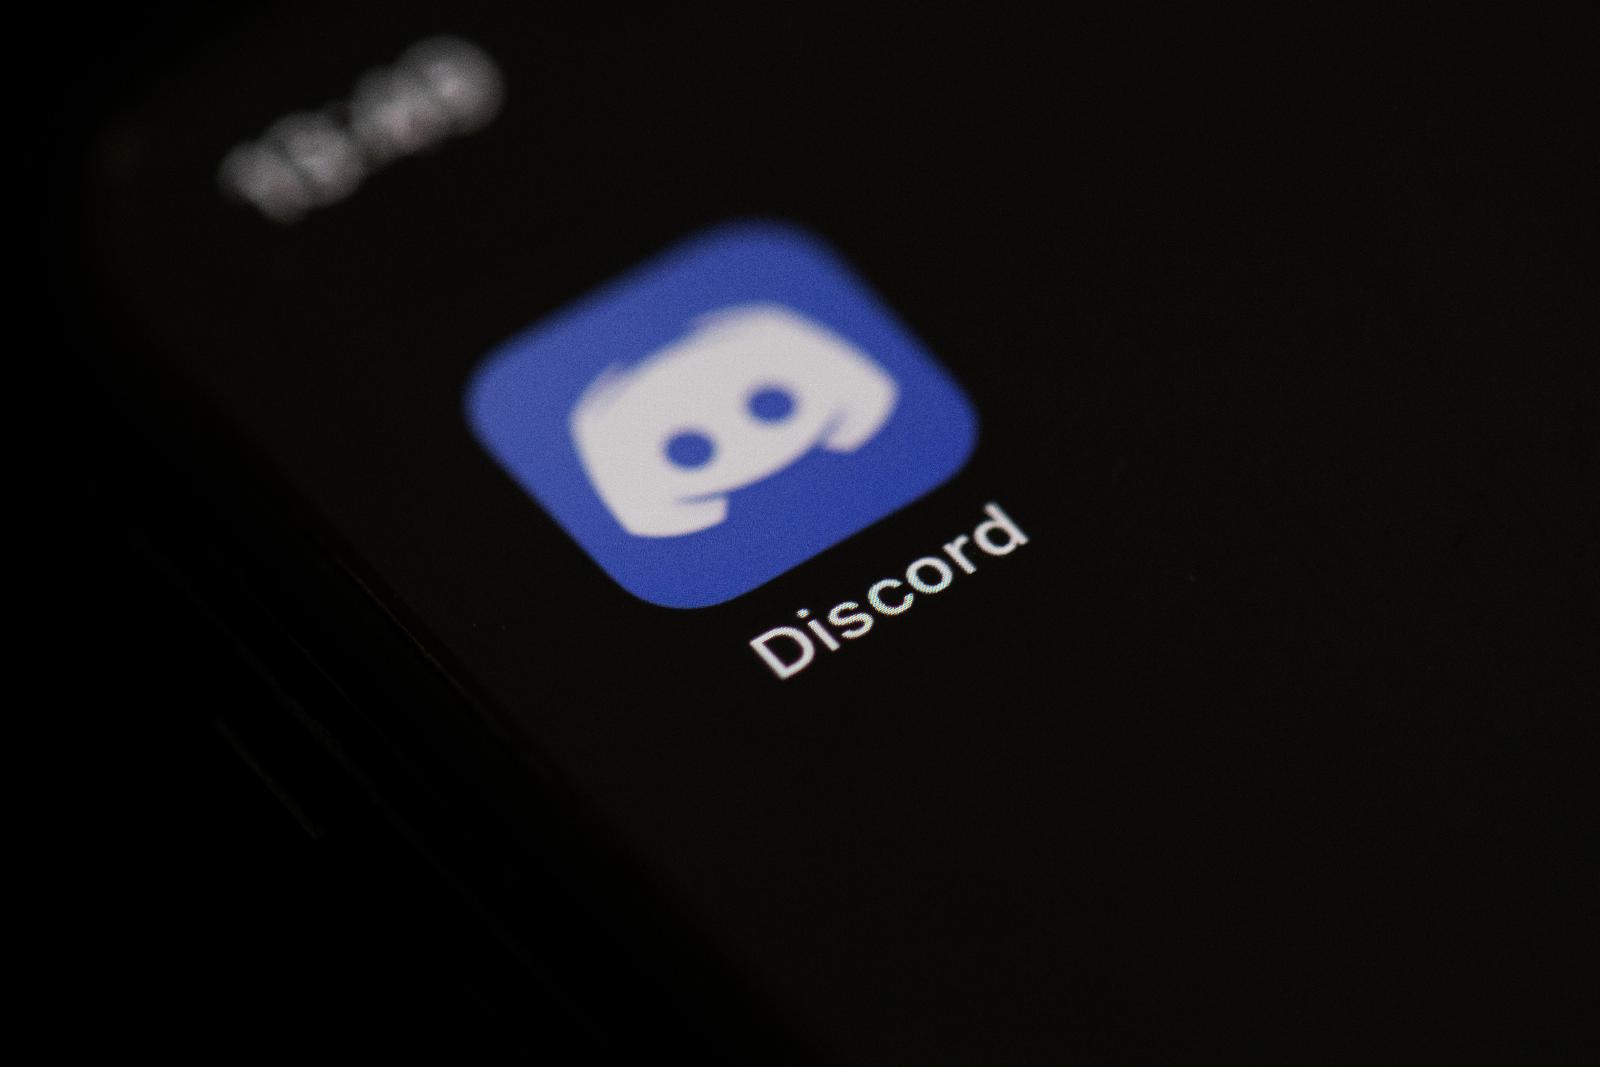 Discord is testing parental controls that allow for monitoring of friends and servers